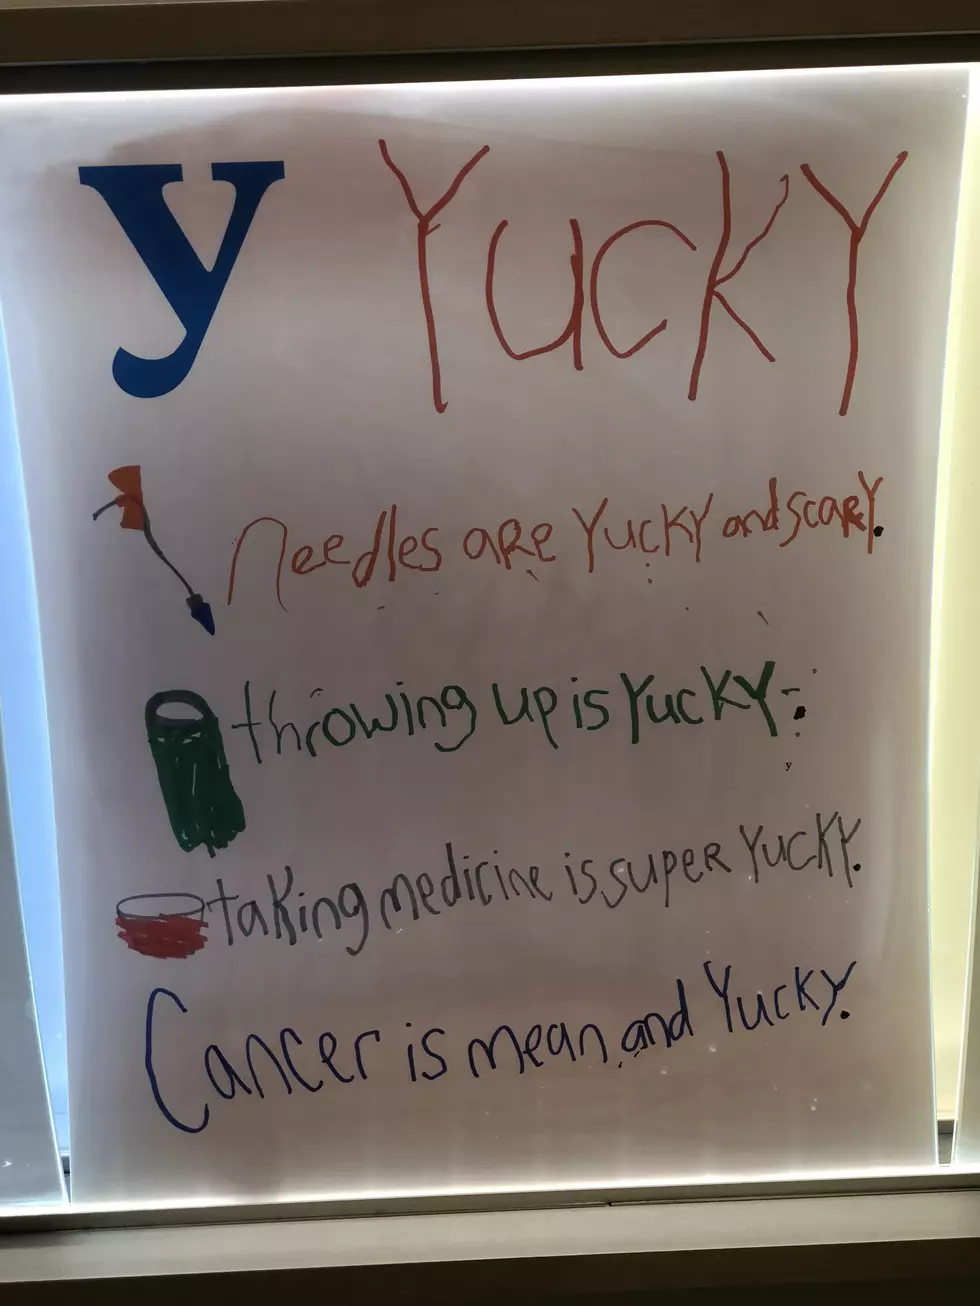 Cancer Child’s Picture; A Yucky Image I’ll Never Forget